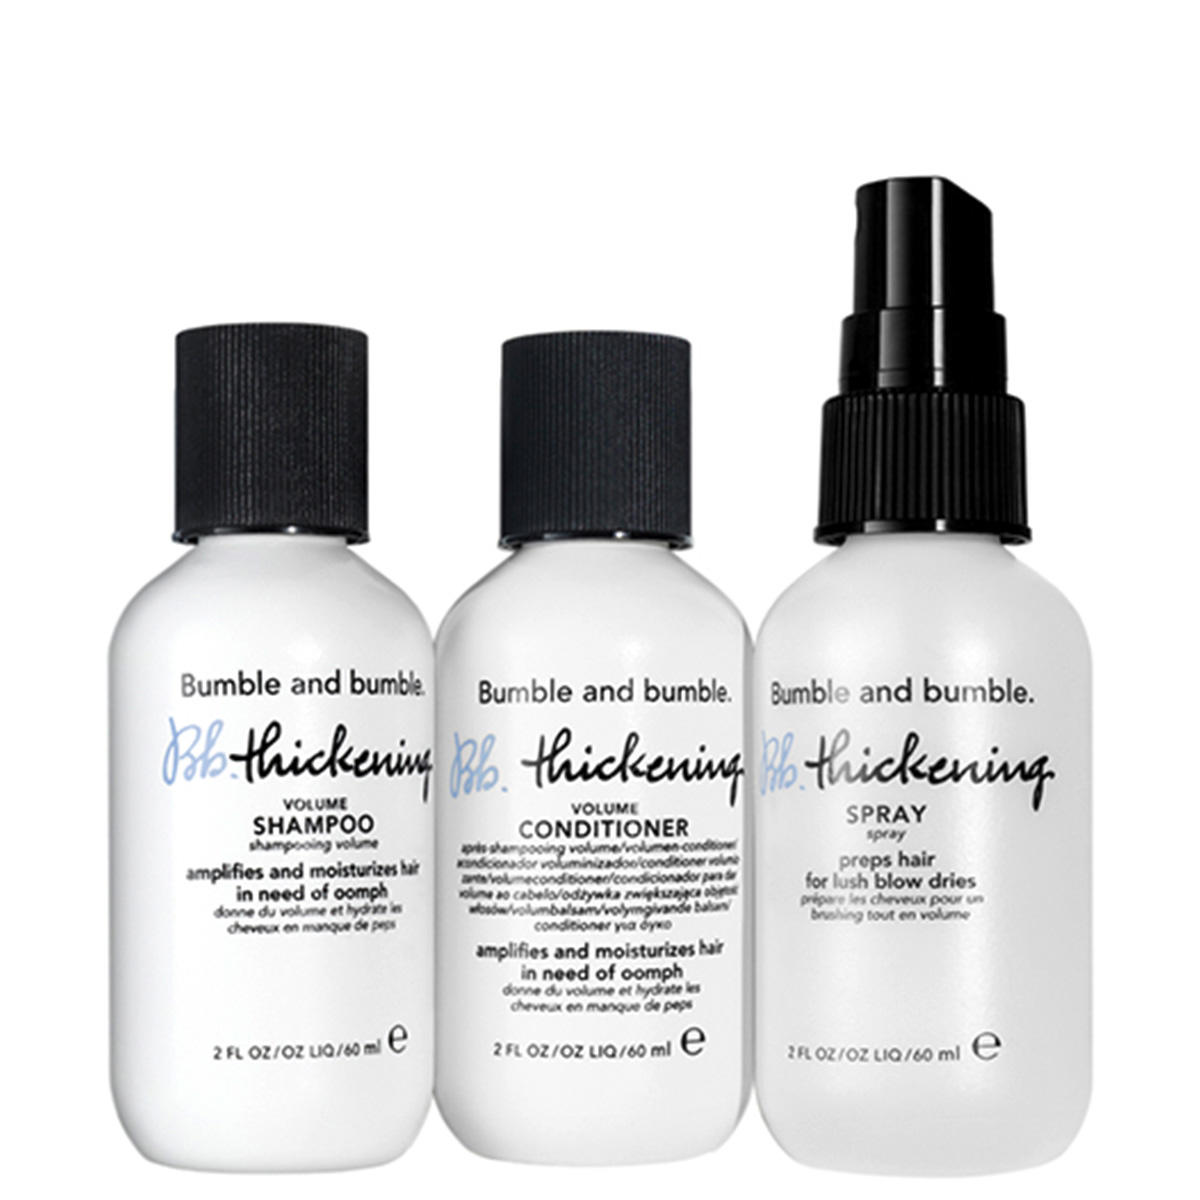 Bumble and bumble Thickening Trial Set  - 3